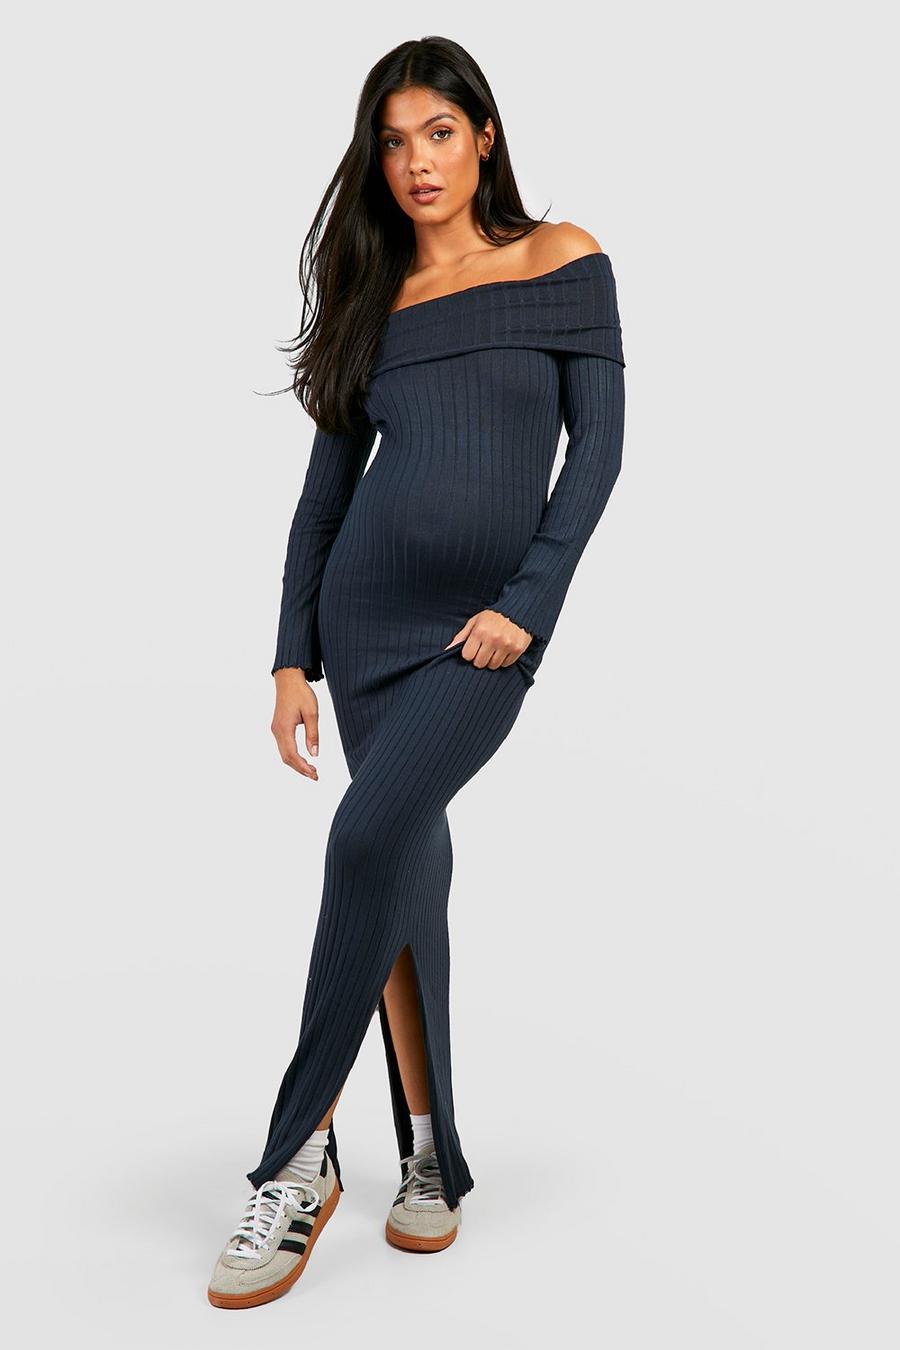 Ink Maternity Off The Shoulder Neckline Knitted Maxi Dress